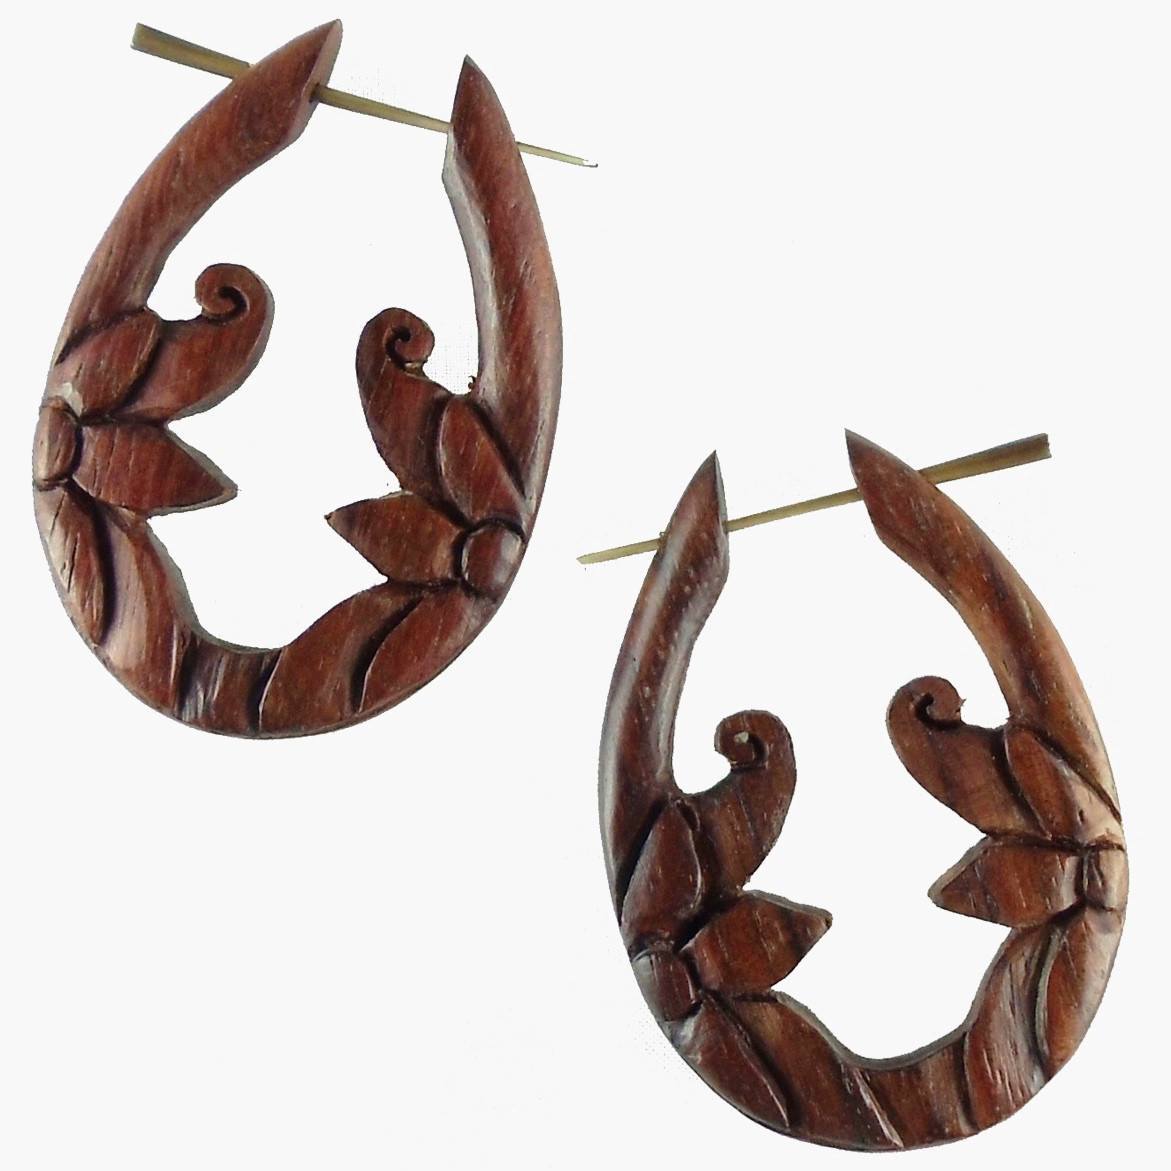 Natural Jewelry :|: Moon Flower, Rosewood. Wooden Earrings. Natural Jewelry. | Wood Earrings